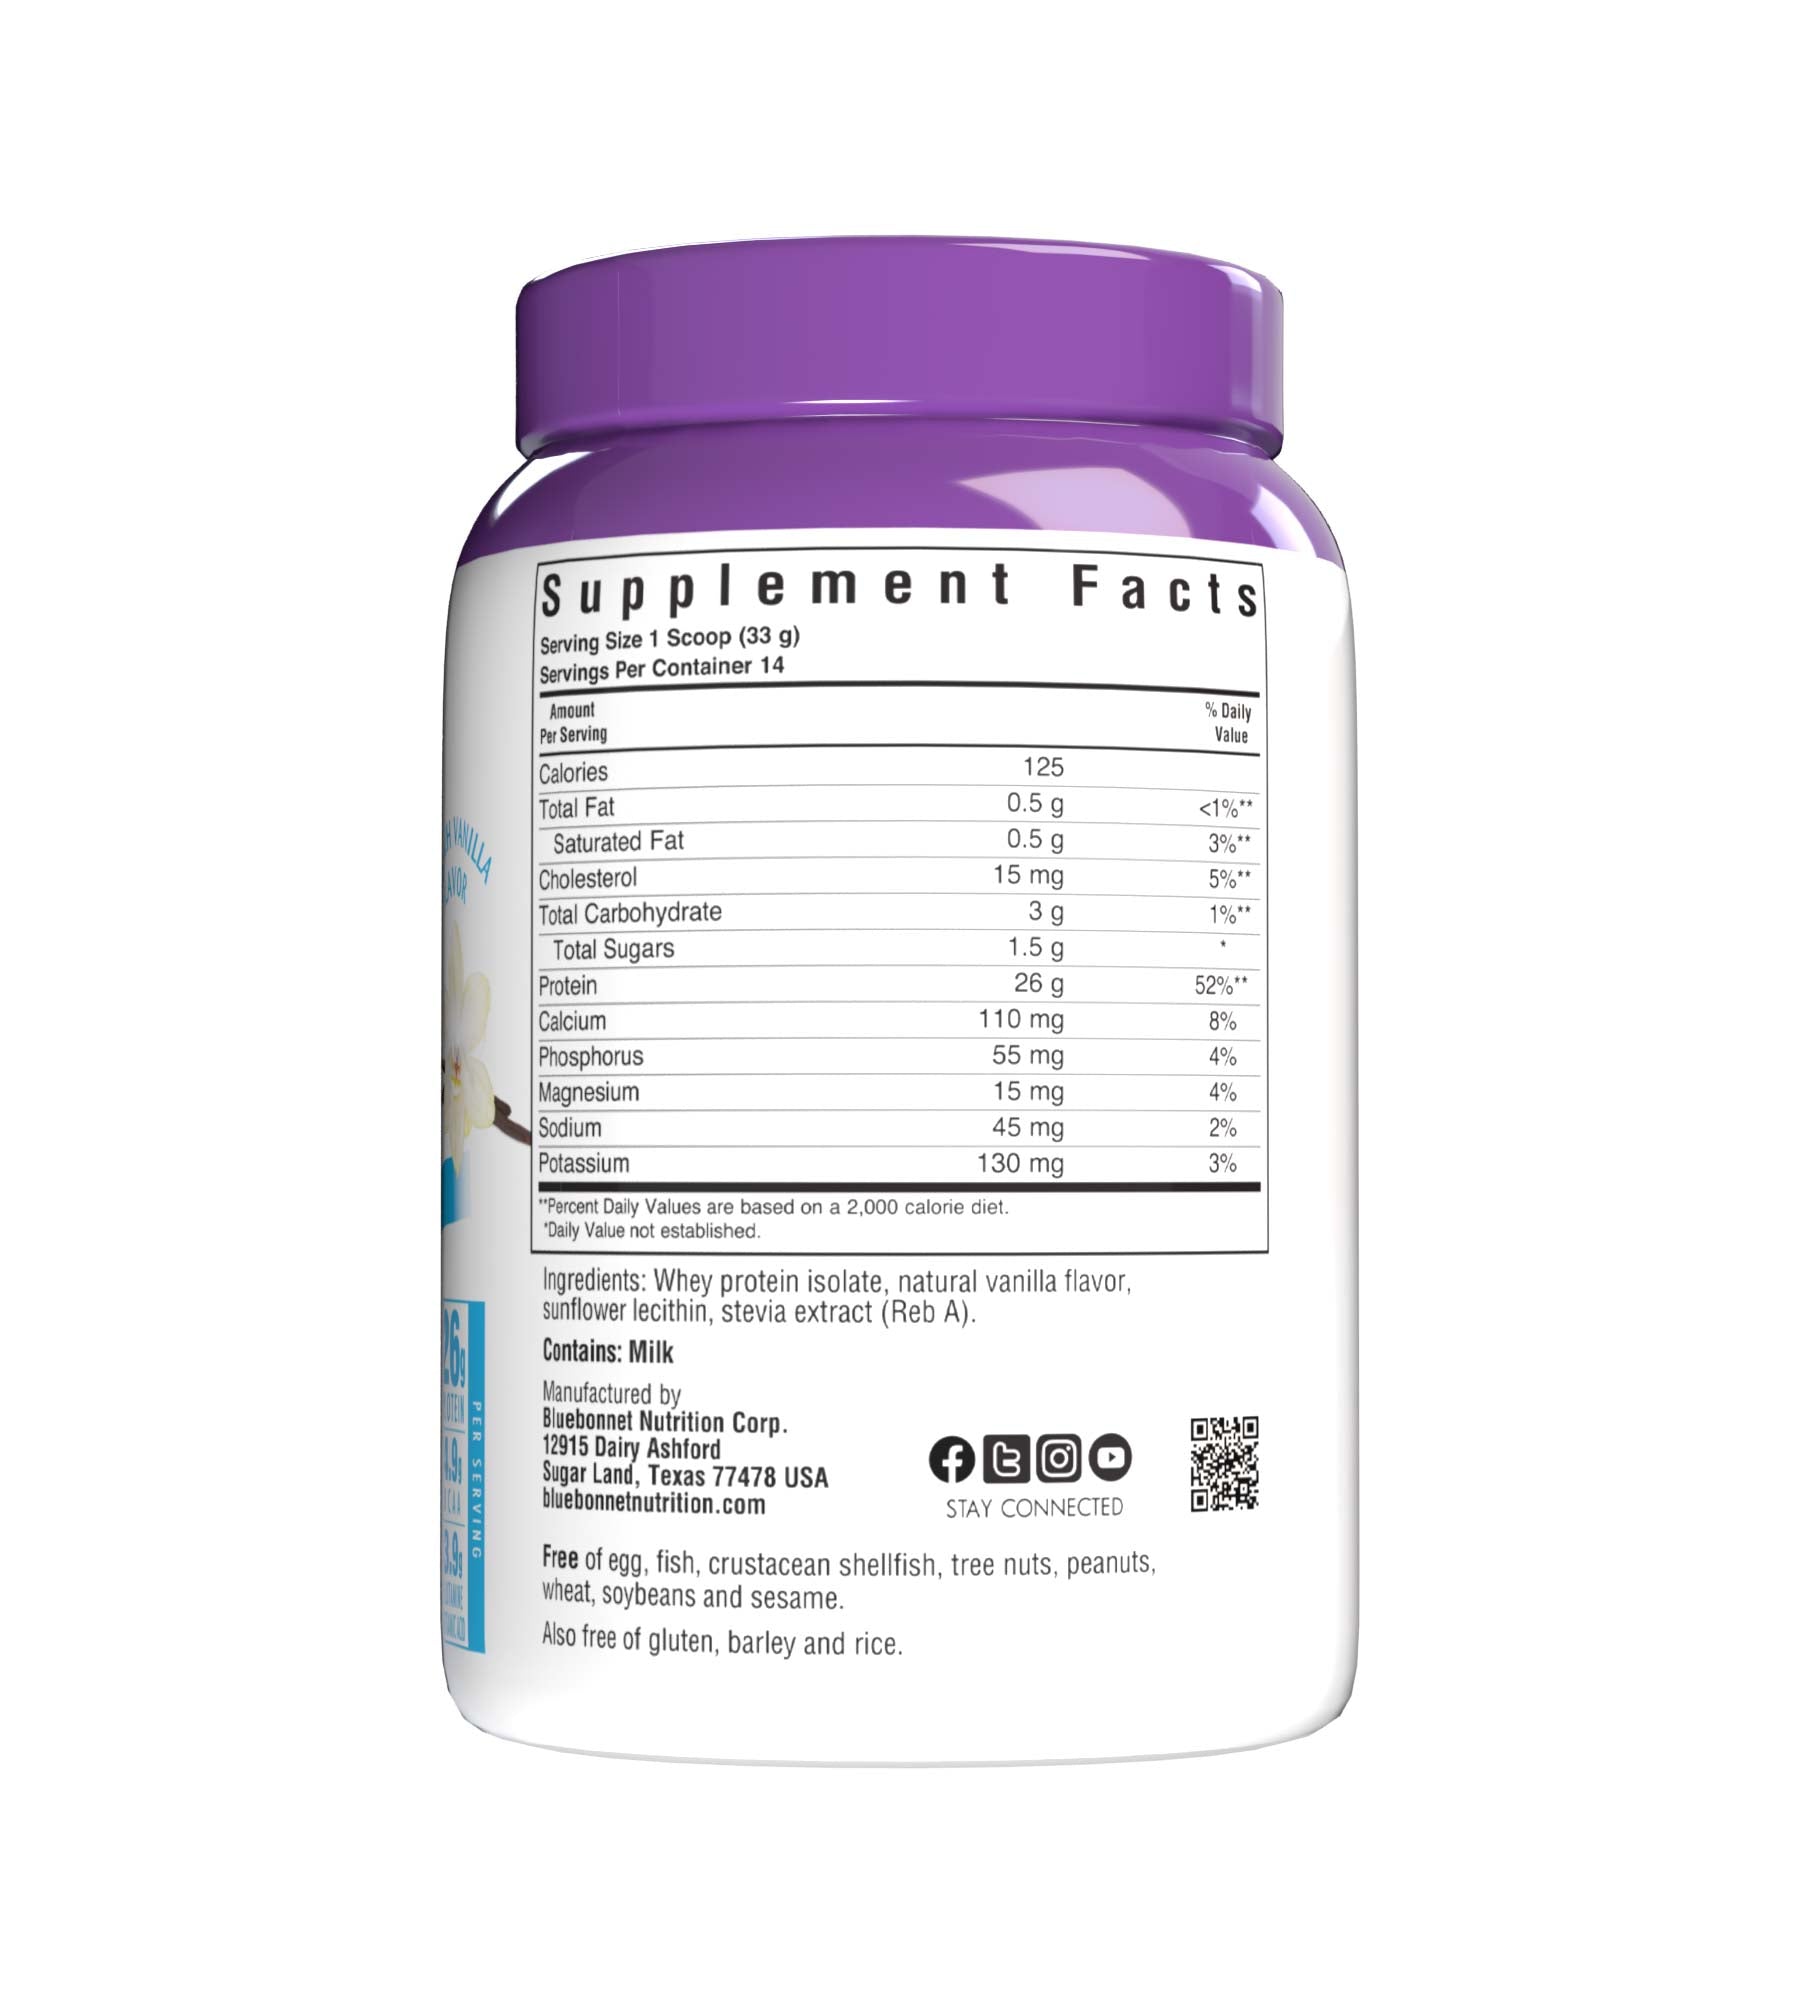 Bluebonnet's Whey Protein Isolate Powder. French vanilla flavor. 26 g of protein, 4.9 g BCAA and 3.9 g Glutamine Glutamic Acid per serving. Supplement facts panel. #size_1 lb